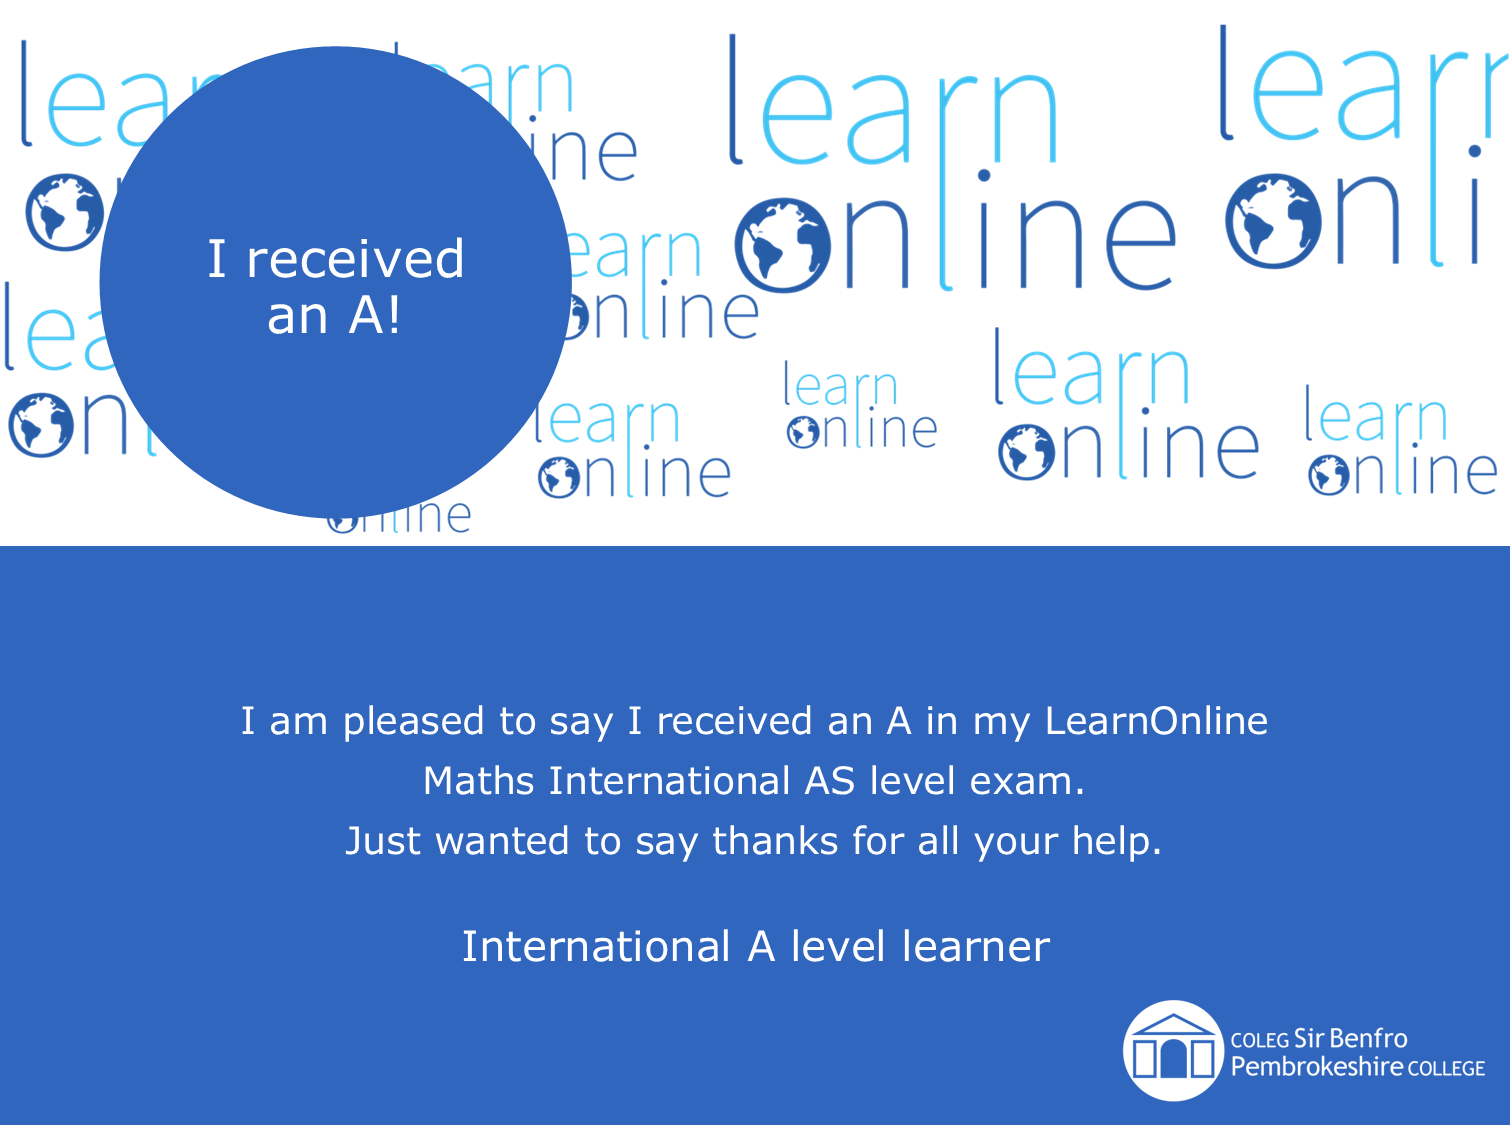 LearnOnline testimonial 'I received an A!' I am pleased to say I received an A in my LearnOnline Maths International AS level exam. Just wanted to say thanks for all your help. International A level learner